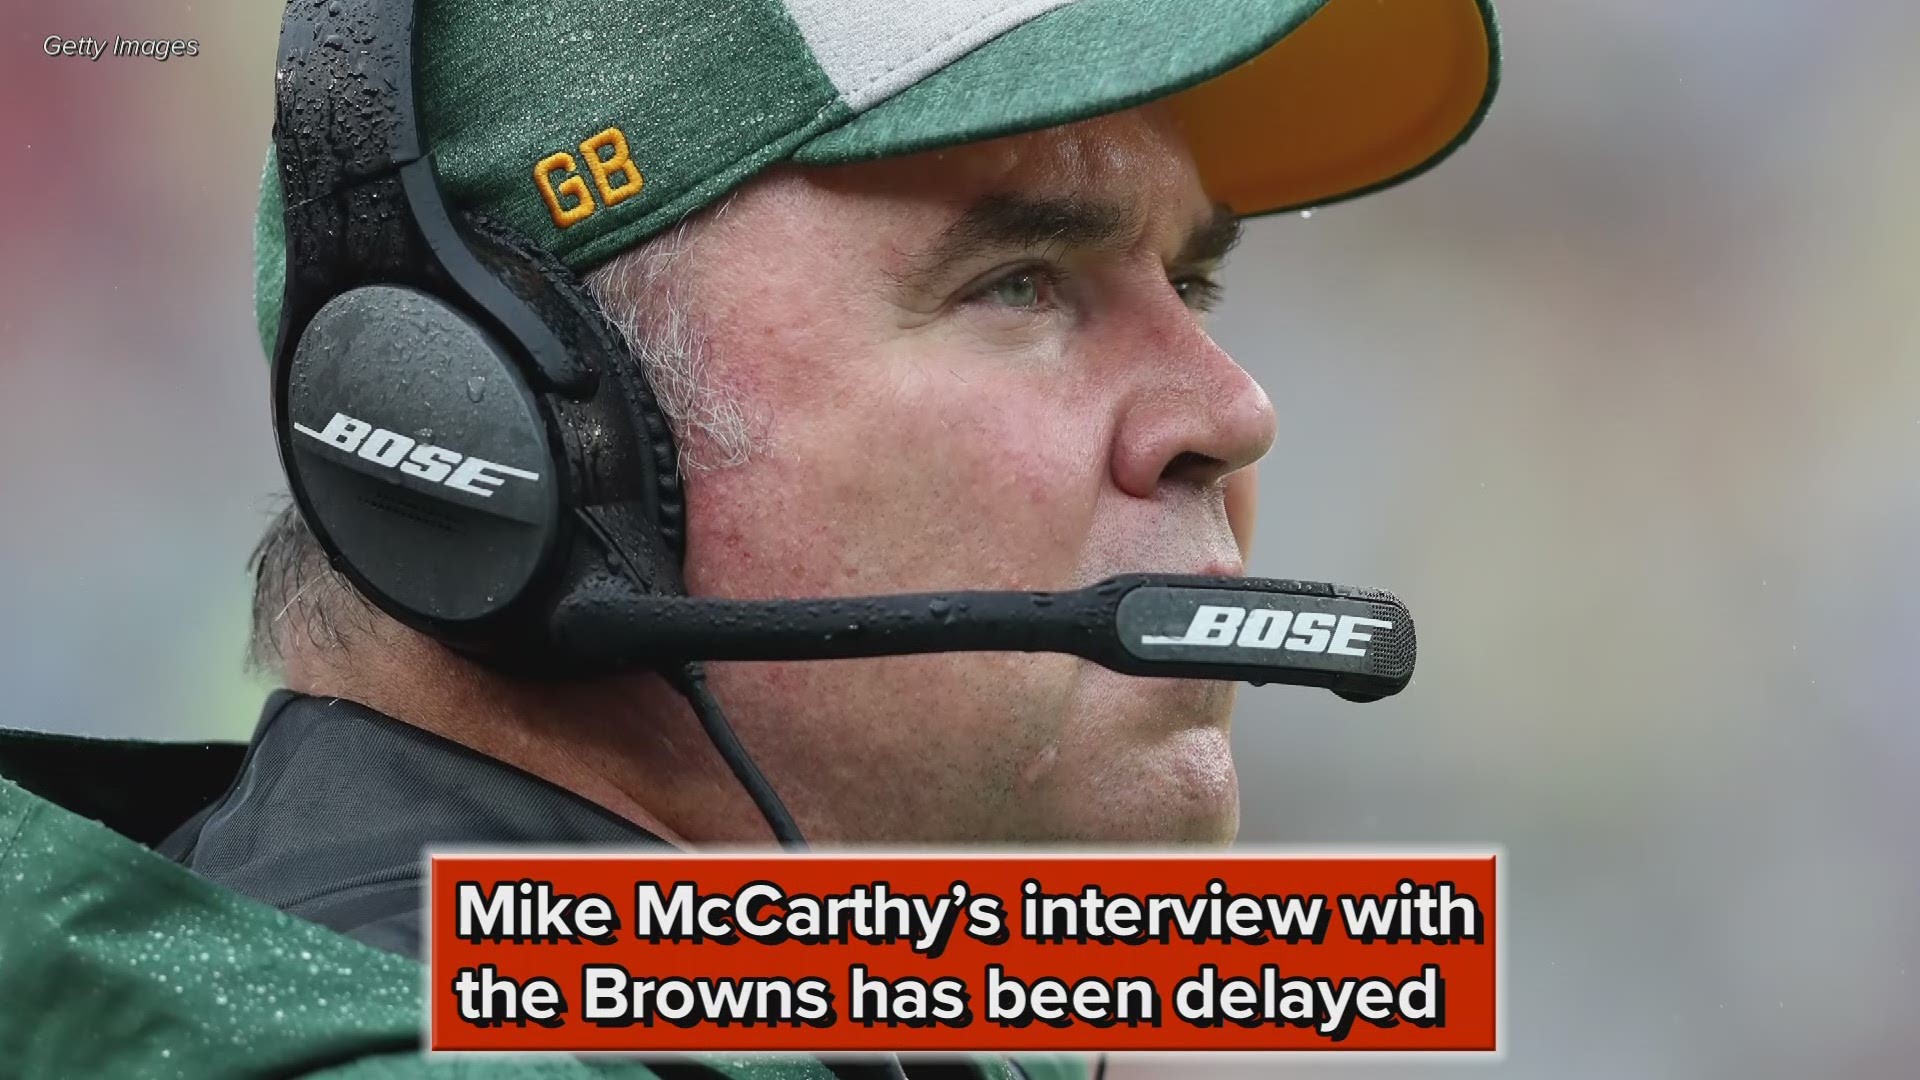 Reportedly, Mike McCarthy’s interview with the Cleveland Browns has been moved to next week.